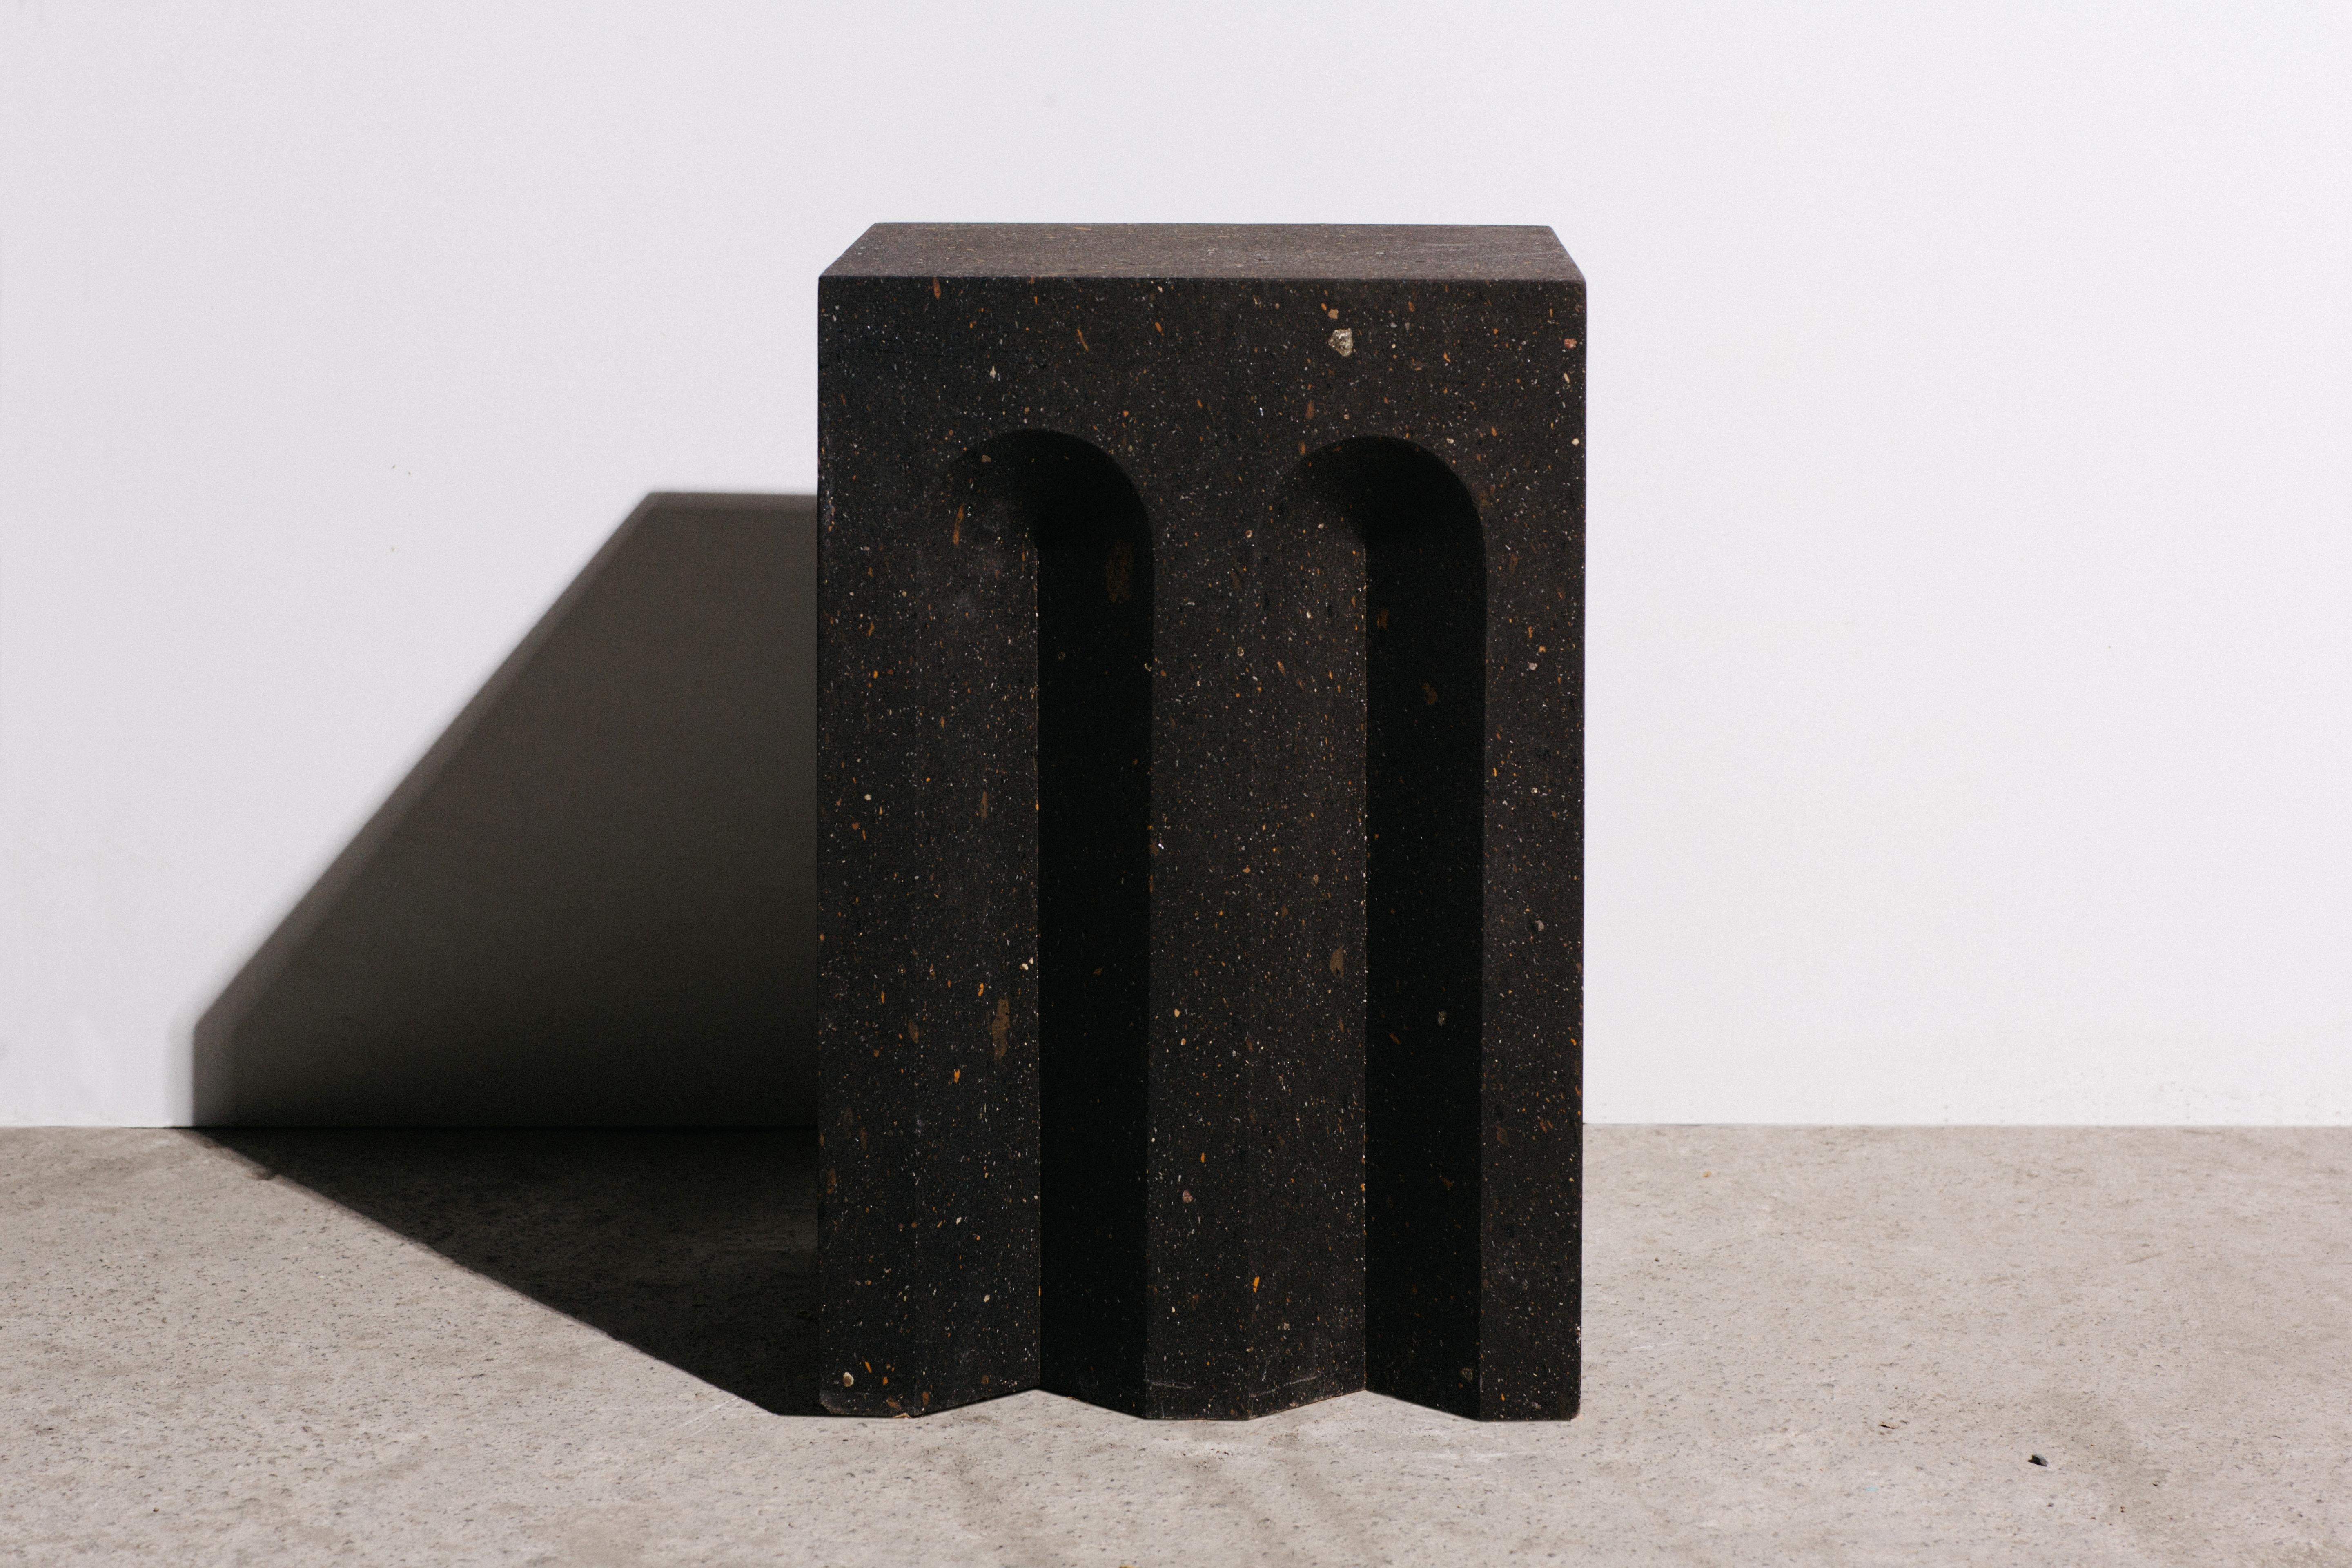 The source side table No.5 by a Space
Dimensions: D 30 x W 30 x H 45cm
Materials: Black tuff.
Weight: 45 kg

Inspired by antiquity, Material, craftsmanship and architecture of Armenia, this collection consists of 12 limited edition objects,